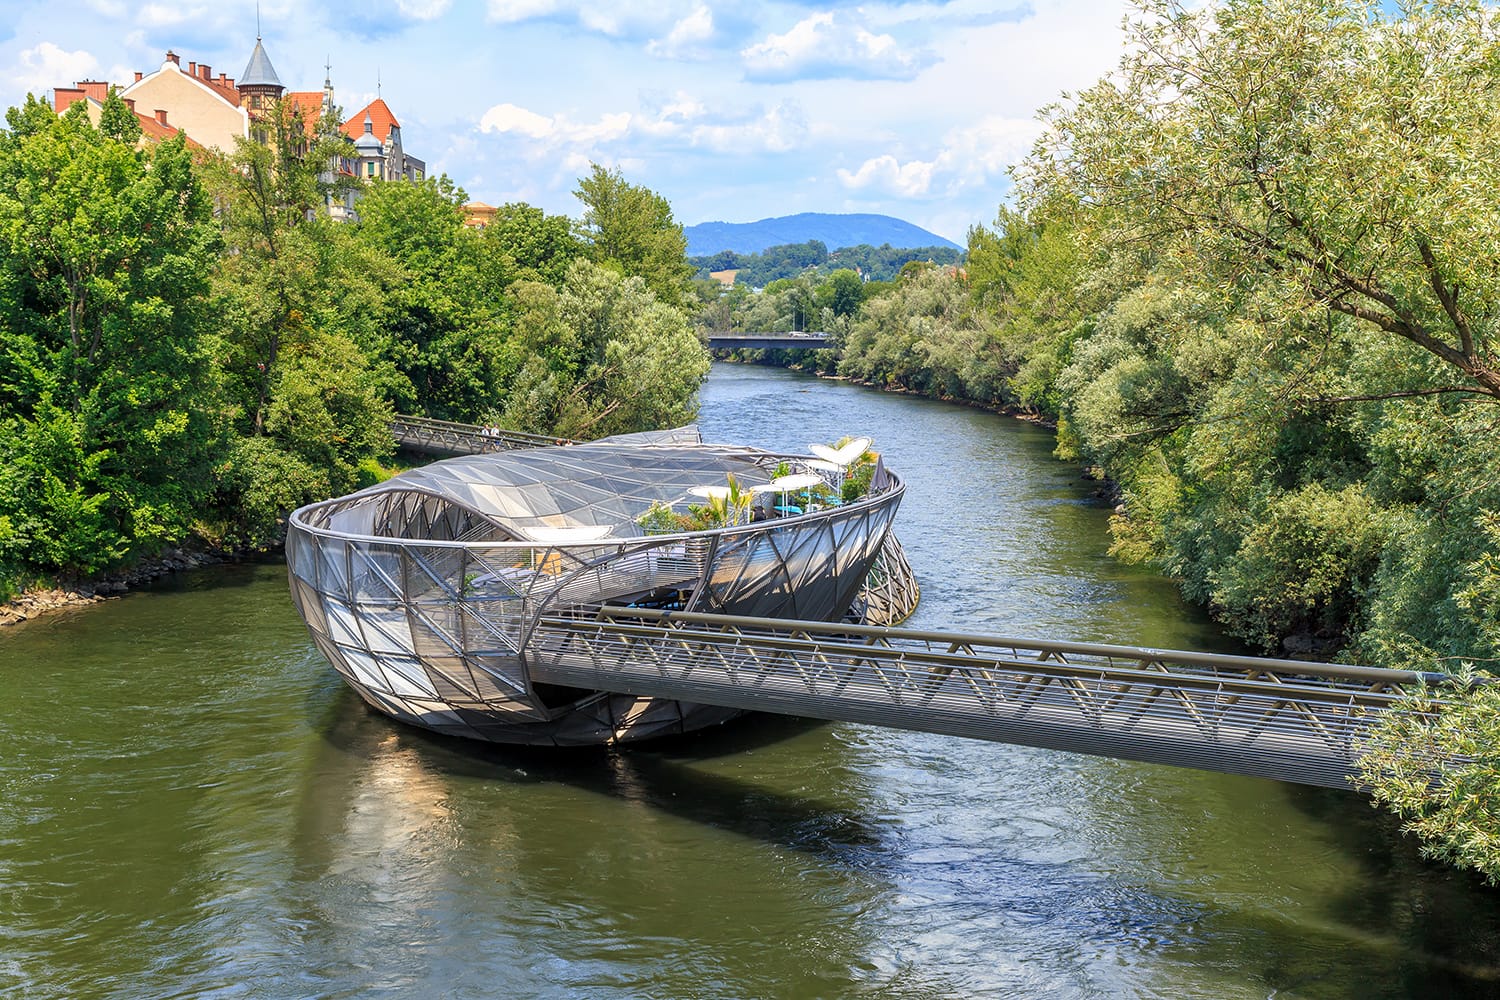 Island in the Mur - Murinsel is an artificial floating "island" in the middle of the Mur River in Graz, Austria